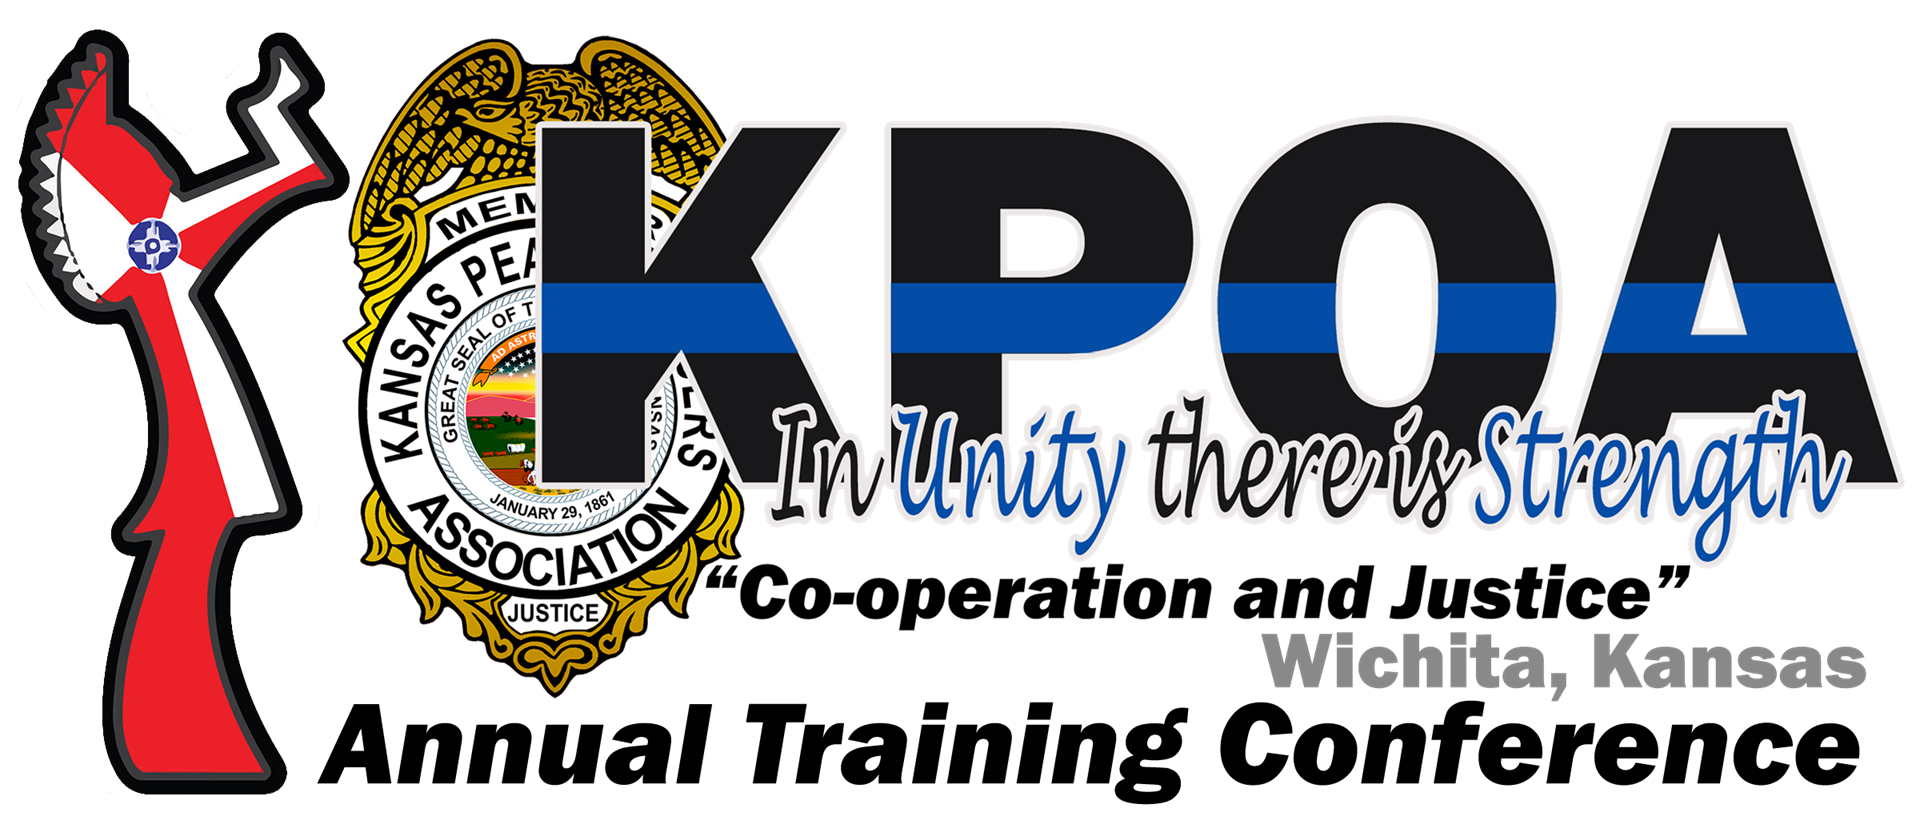 KPOA Annual Training Conference